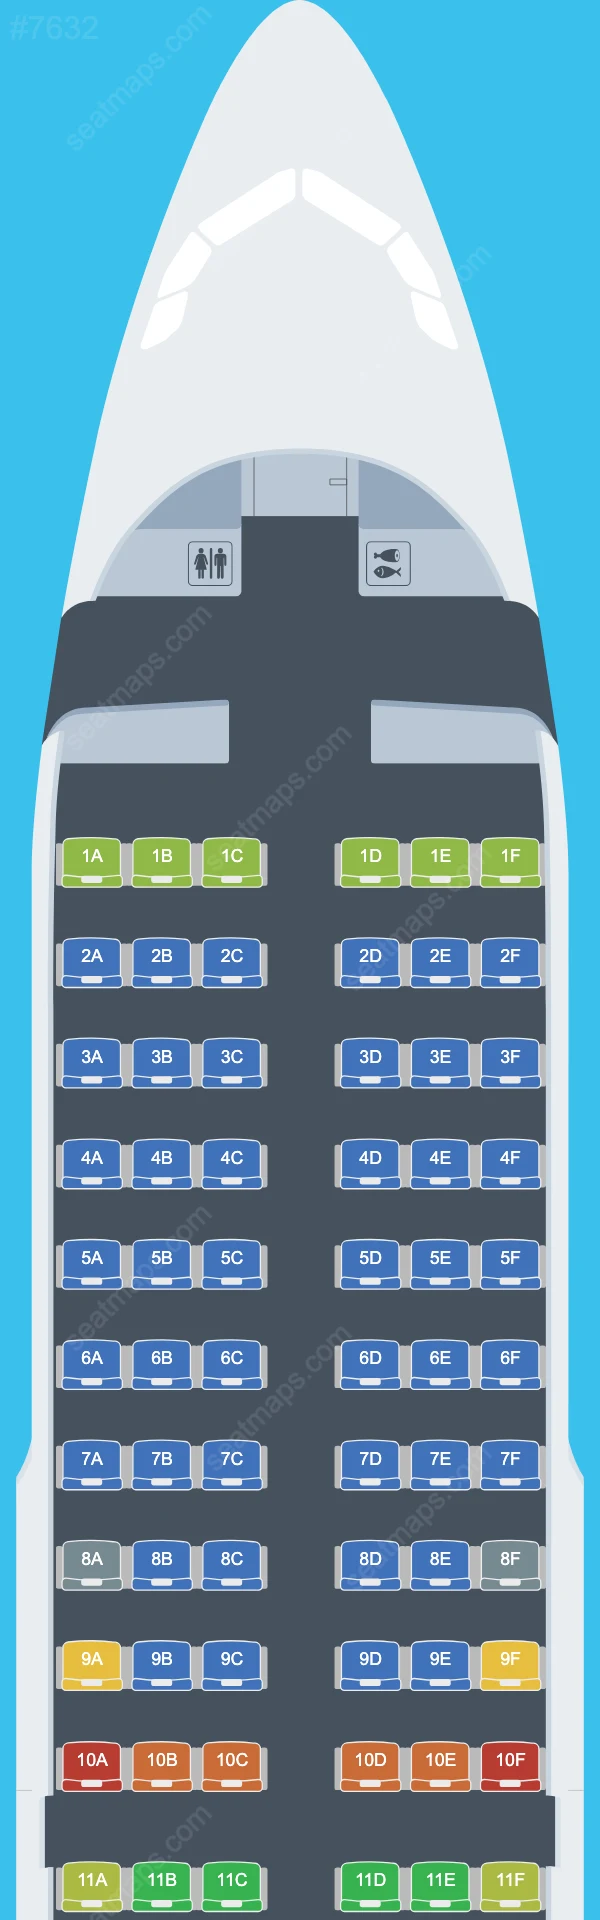 Chair Airlines Airbus A319 Seat Maps A319-100